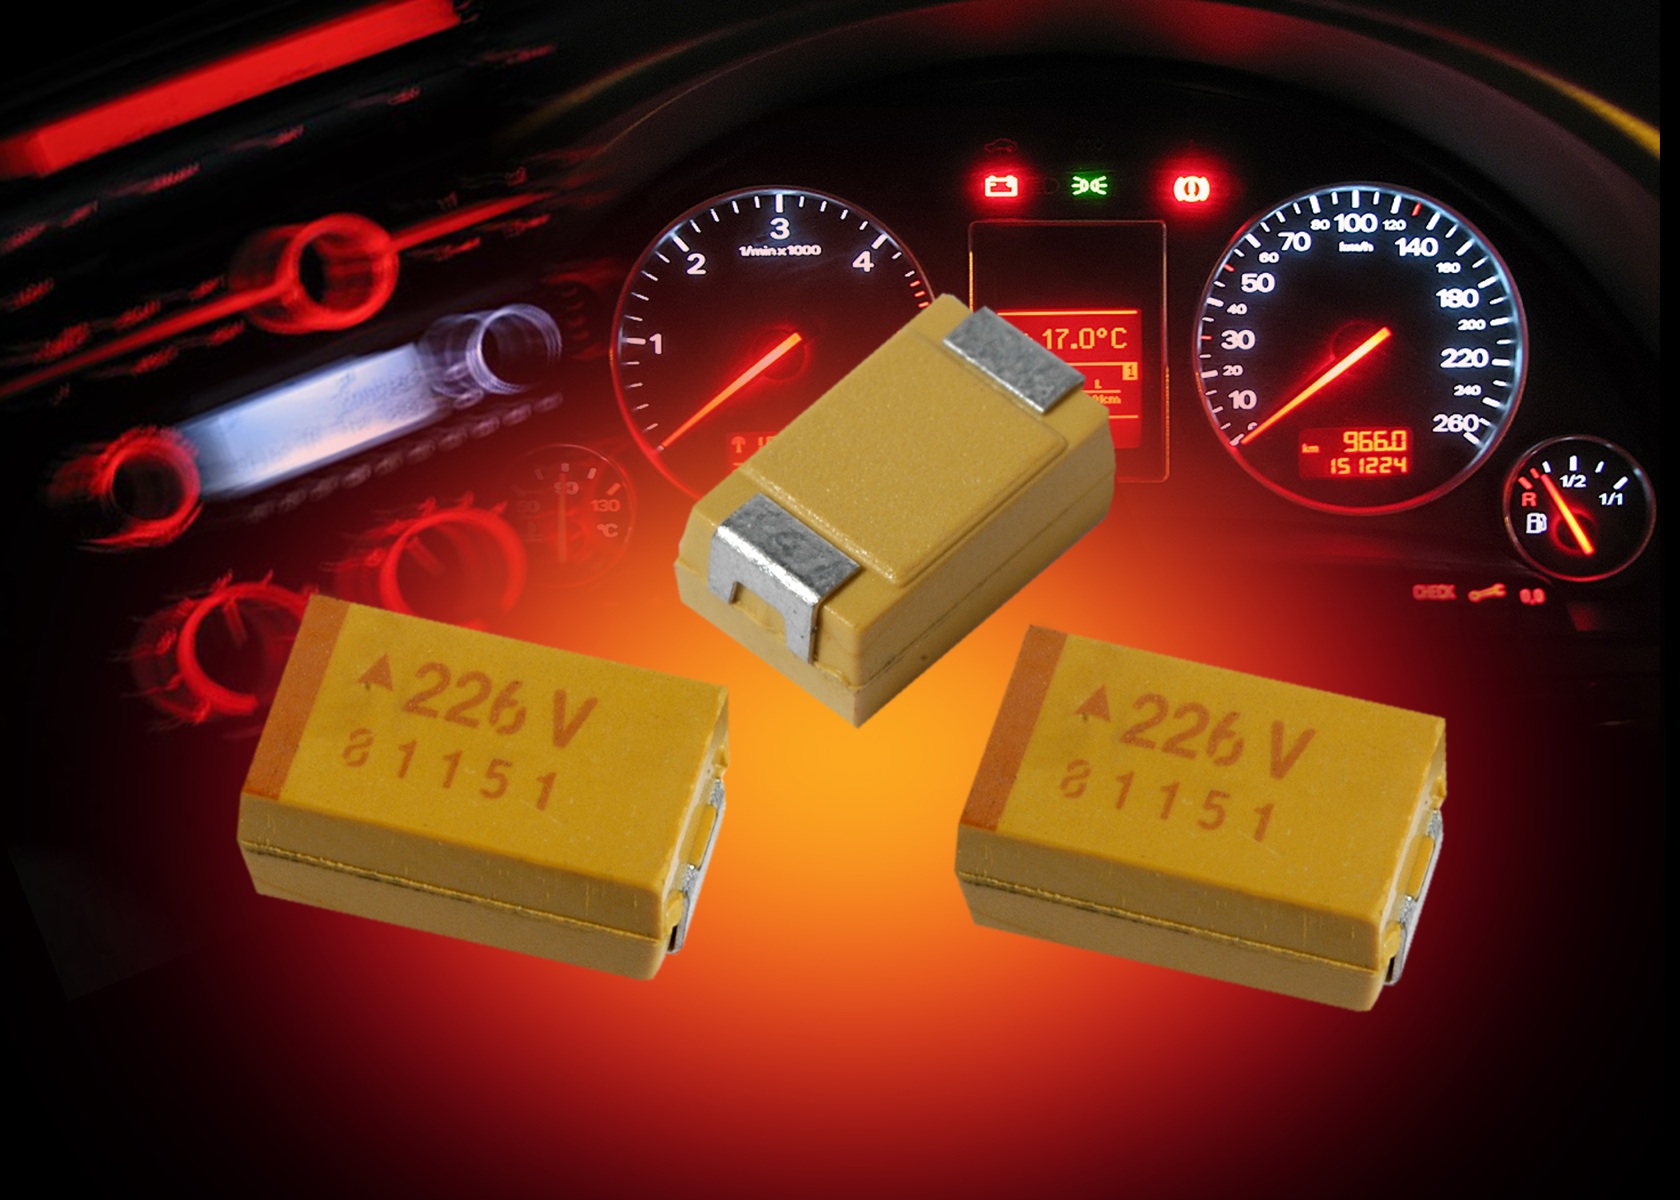 AVX Expands Robust, Commercial-Grade SMD Tantalum Capacitor Series for Long-Life Applications